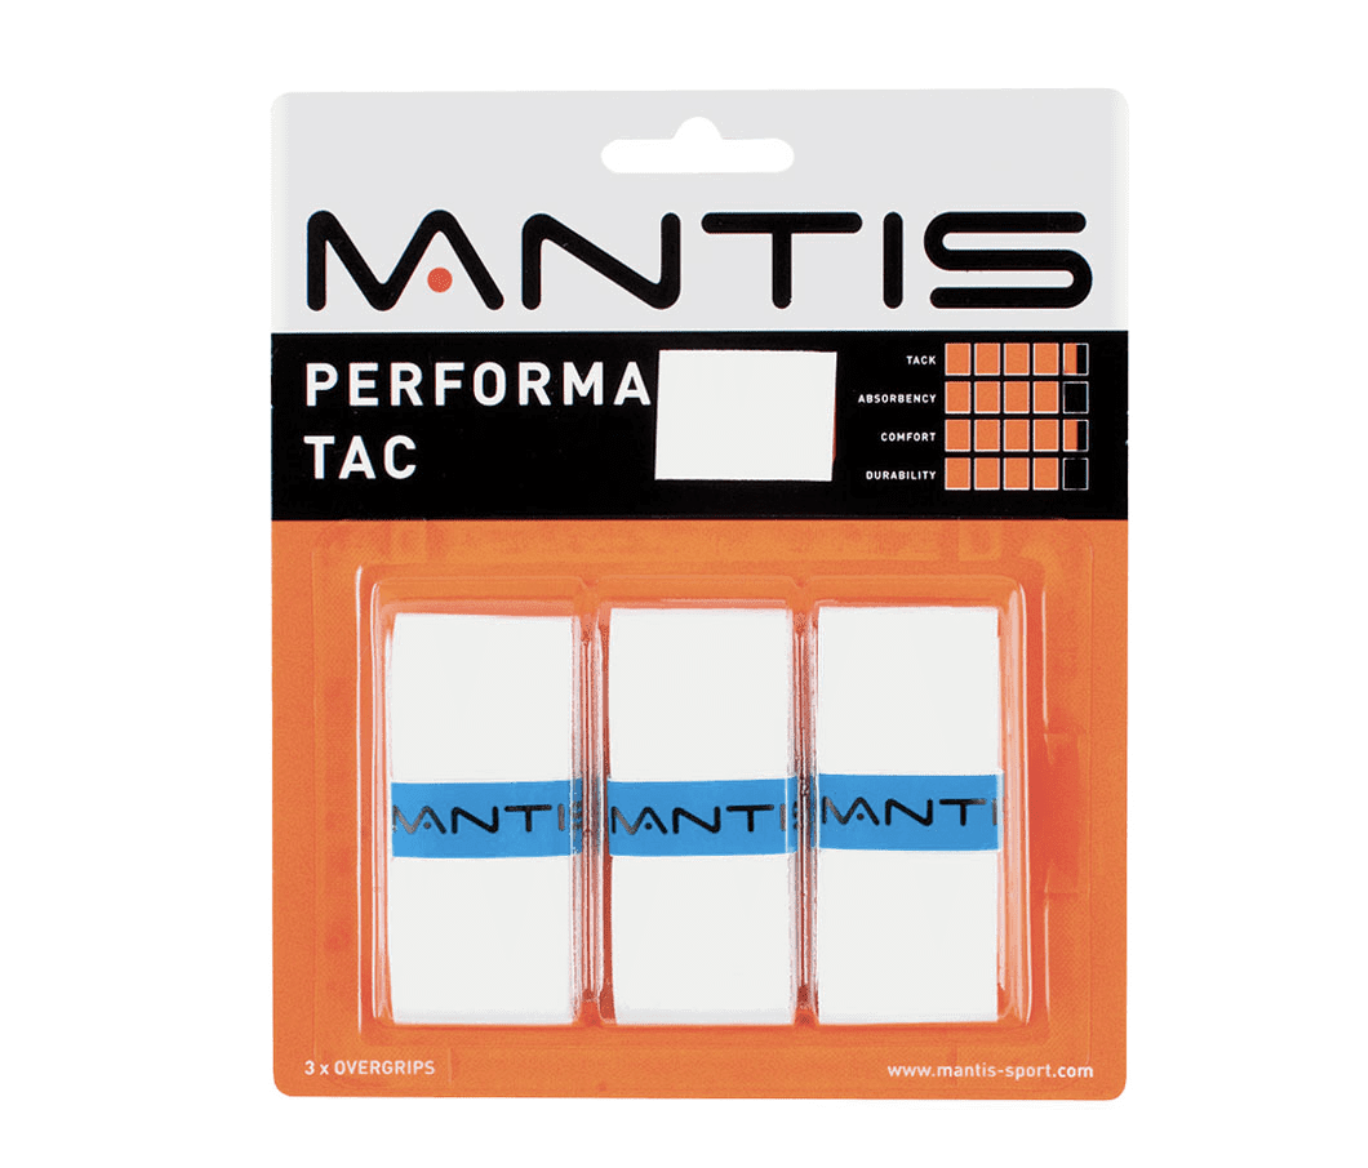 Mantis Performa Tac: Pack of 3 Overgrips (White)